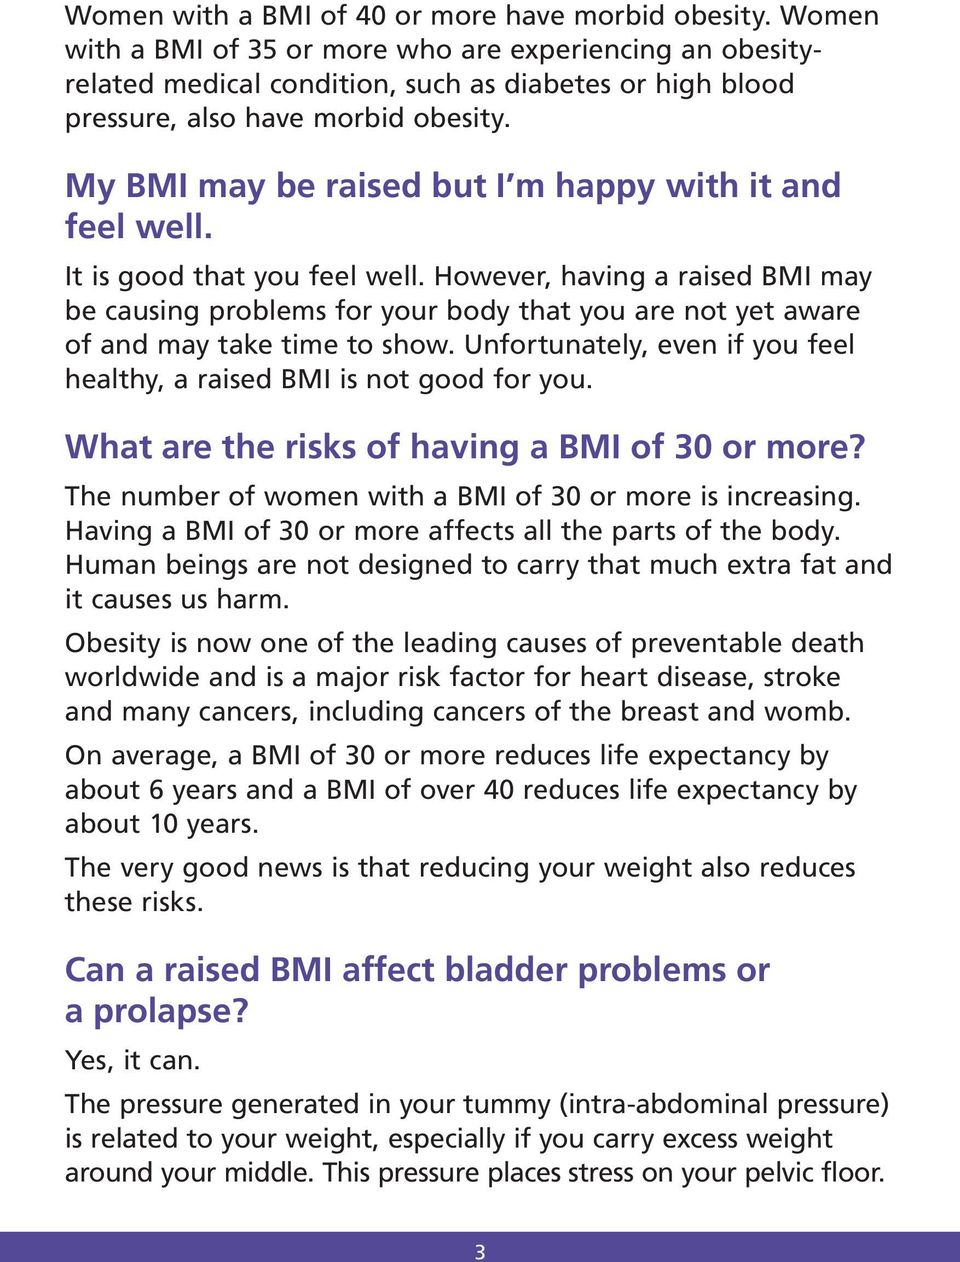 My BMI may be raised but I m happy with it and feel well. It is good that you feel well.